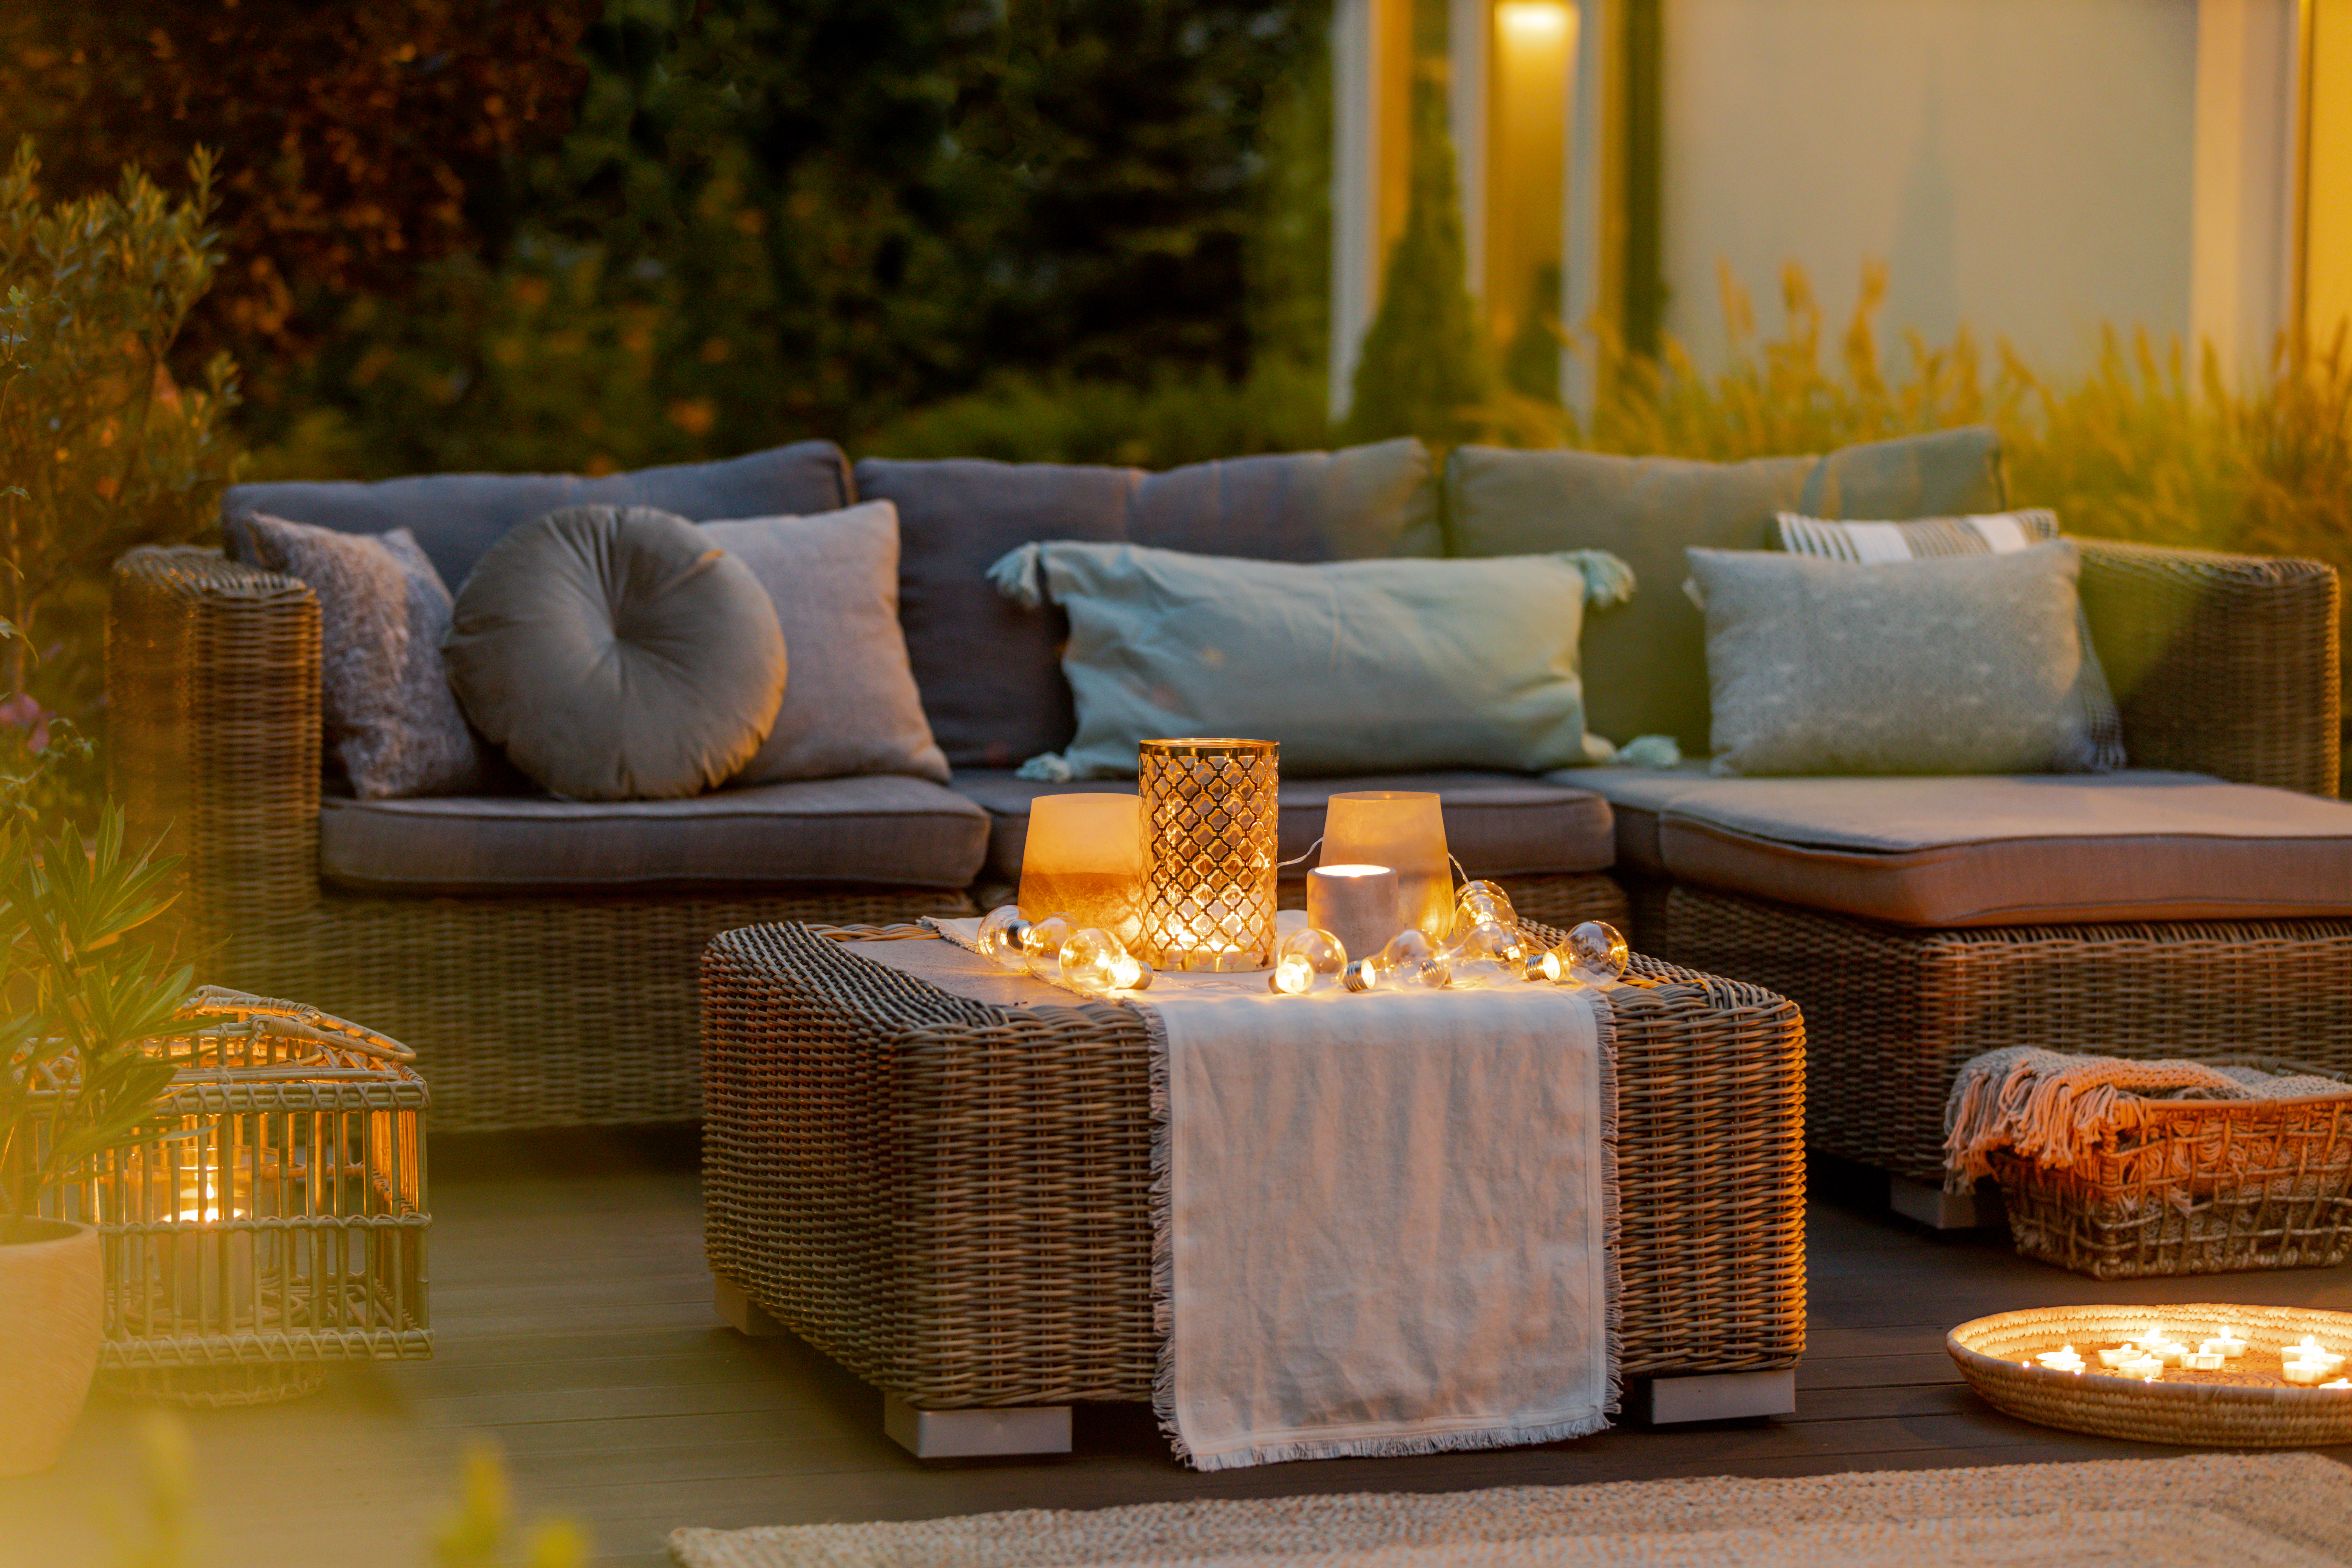 Patio With Furniture, Candles and Outdoor Lighting